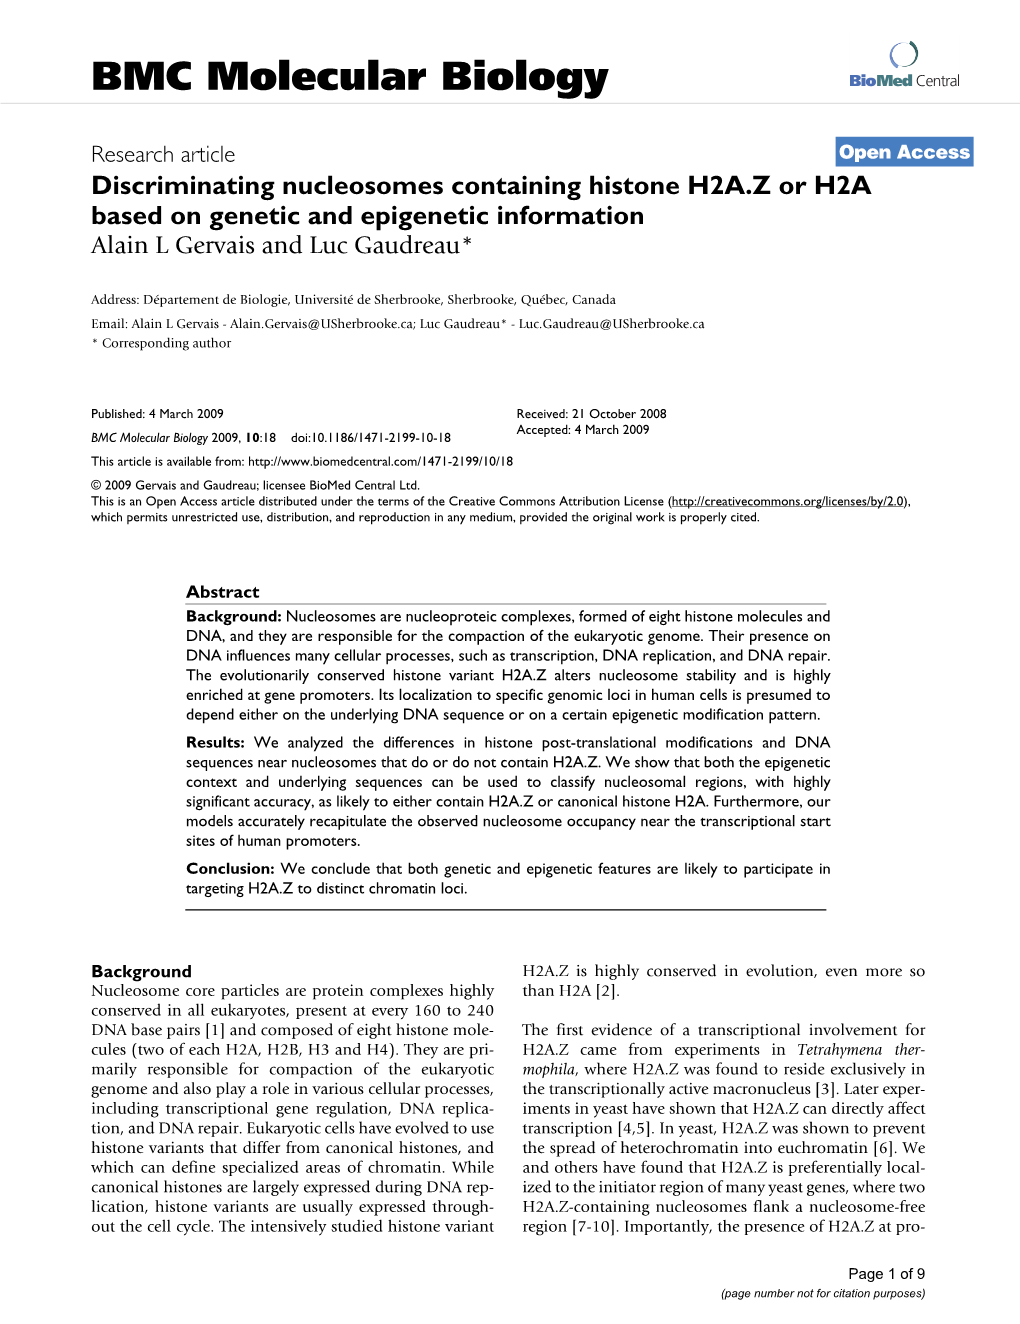 Discriminating Nucleosomes Containing Histone H2A. Z Or H2A